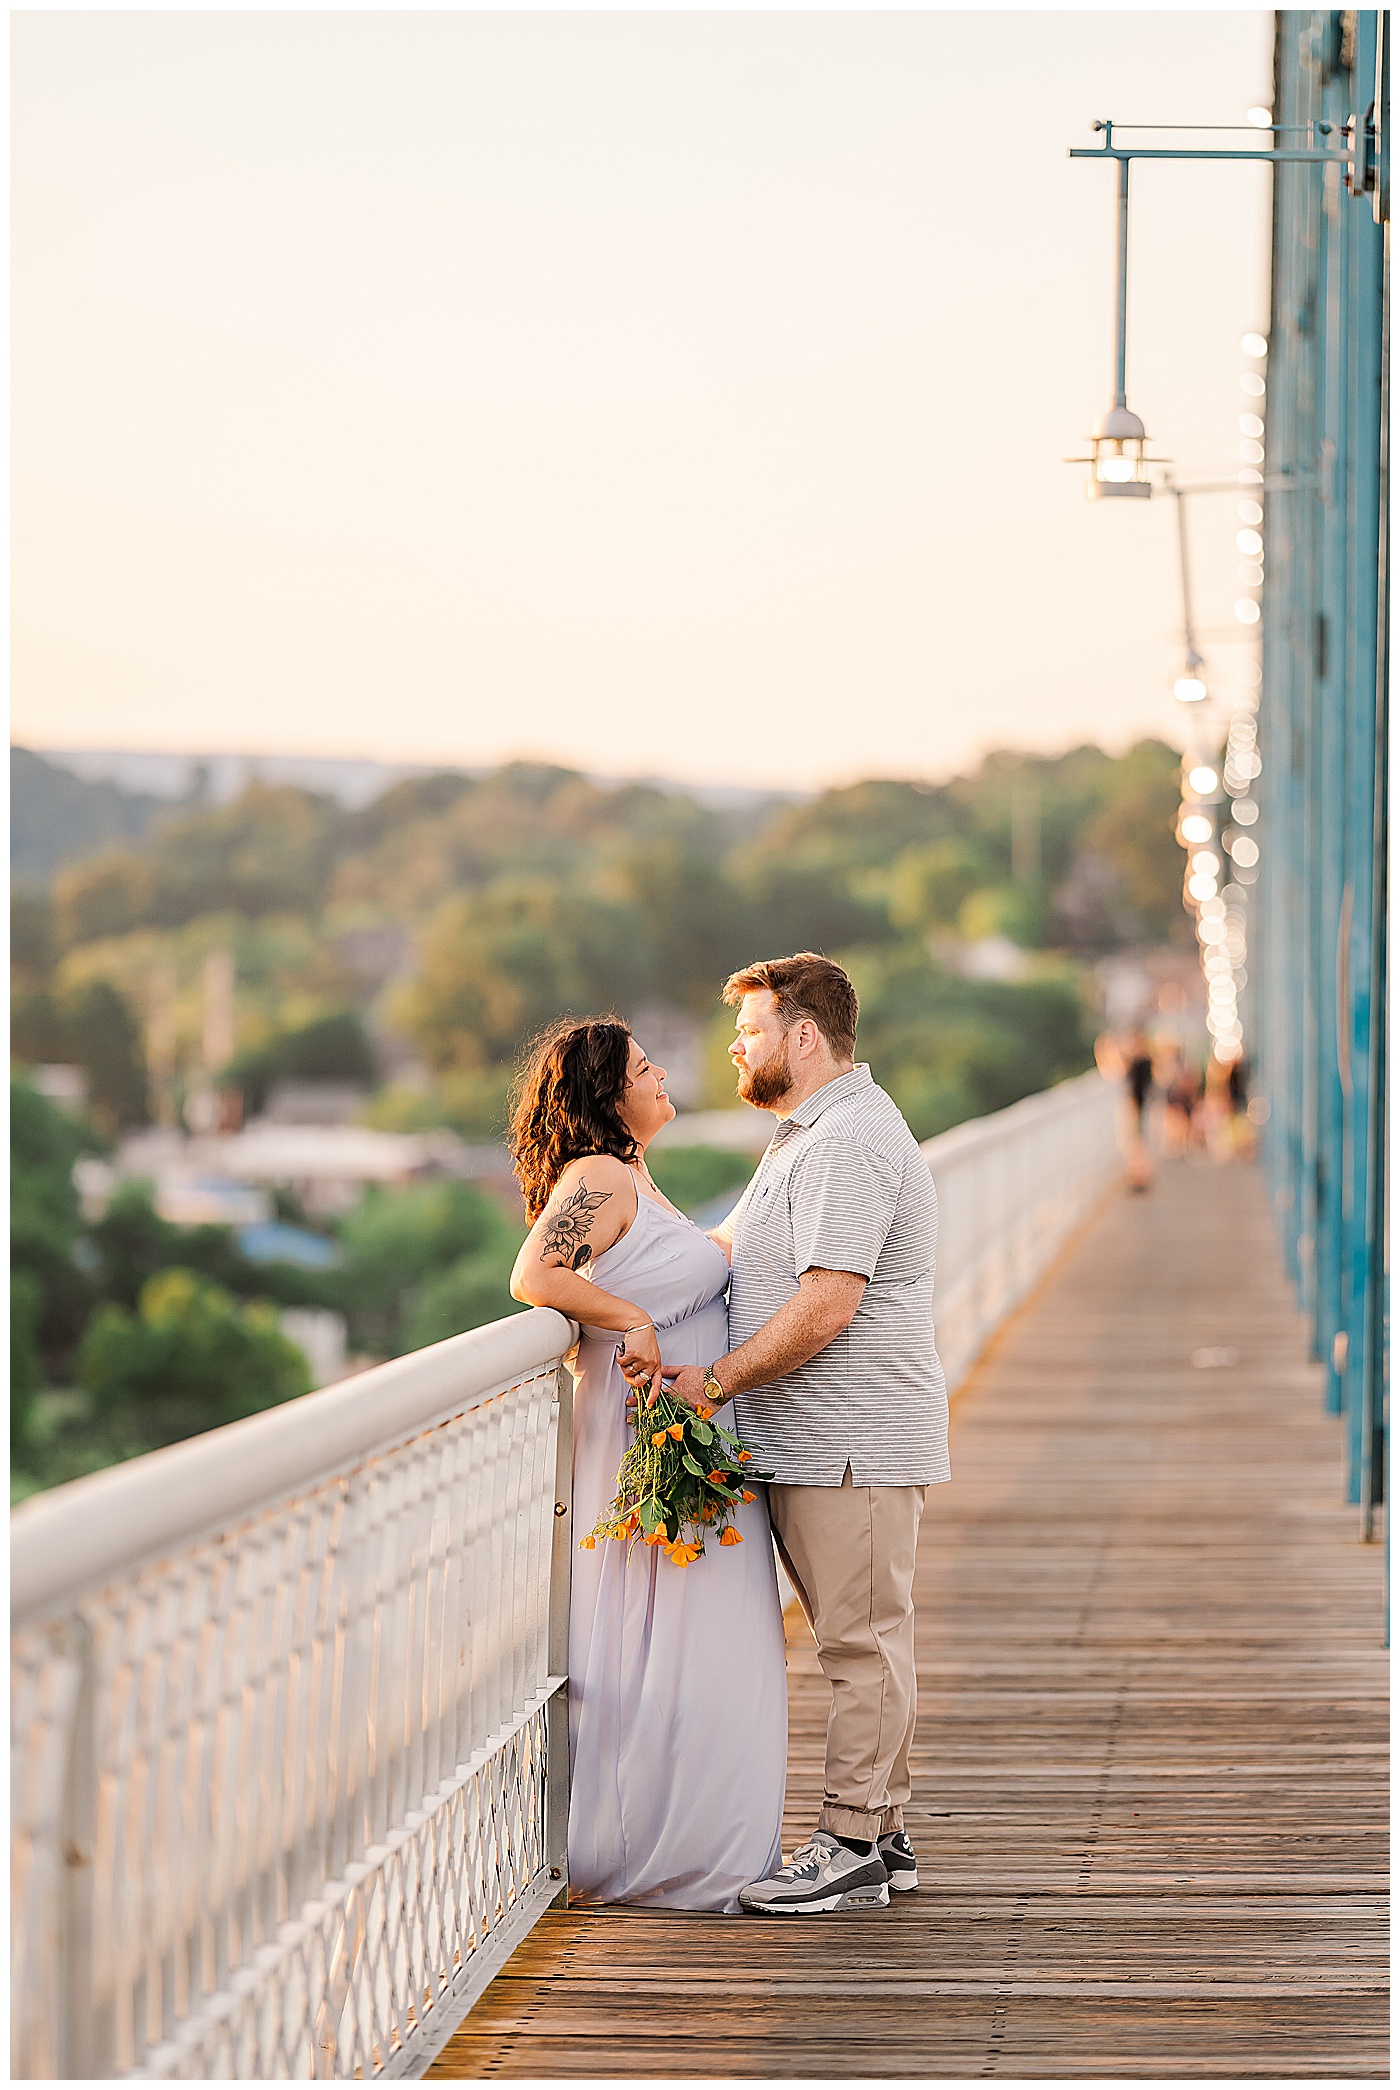 Engagement Pictures on the Chattanooga Walking Bridge